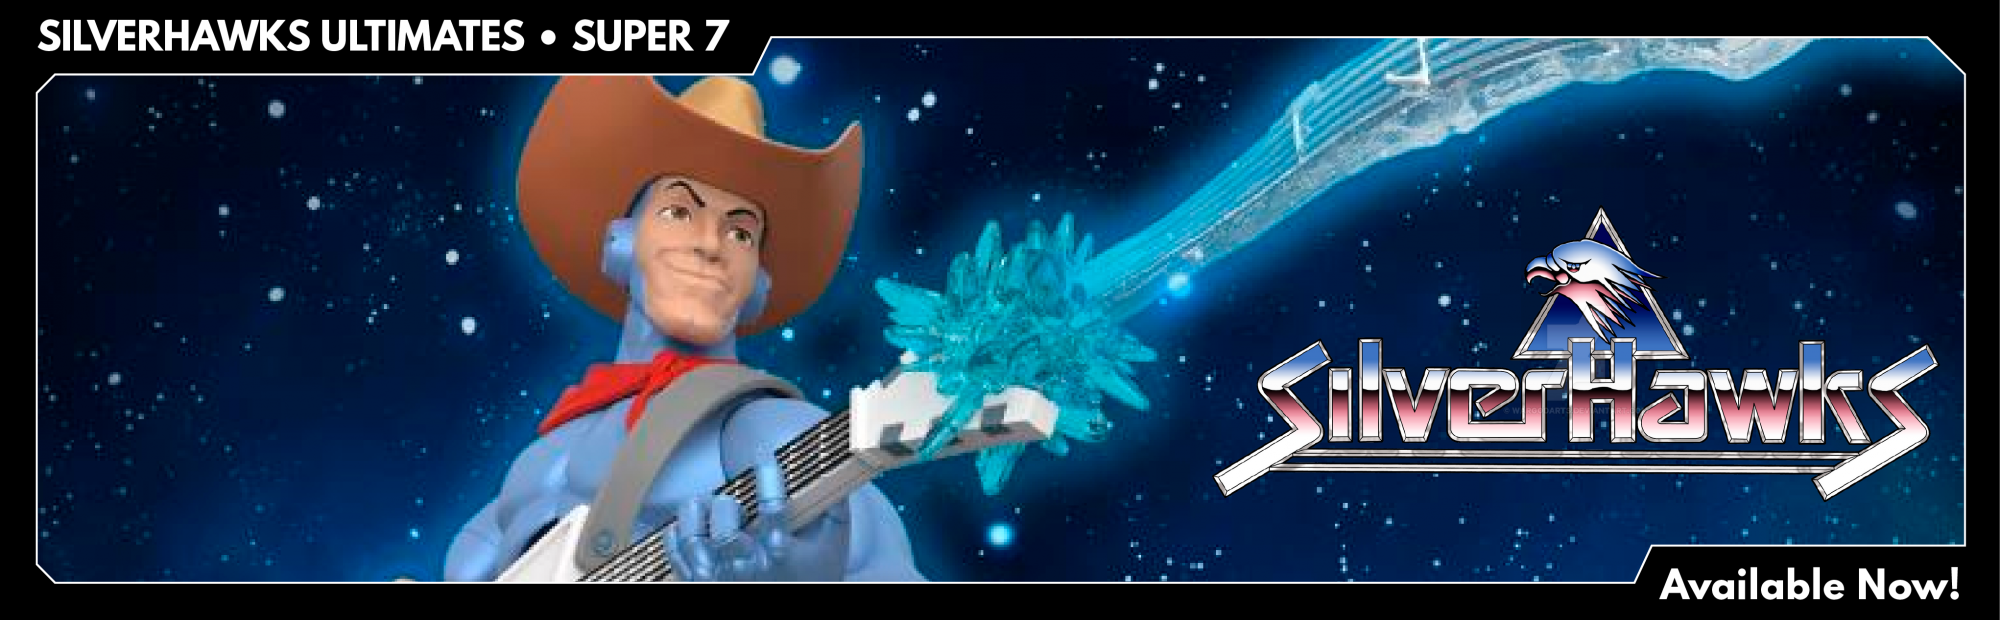 Silverhawks Ultimates from Super 7